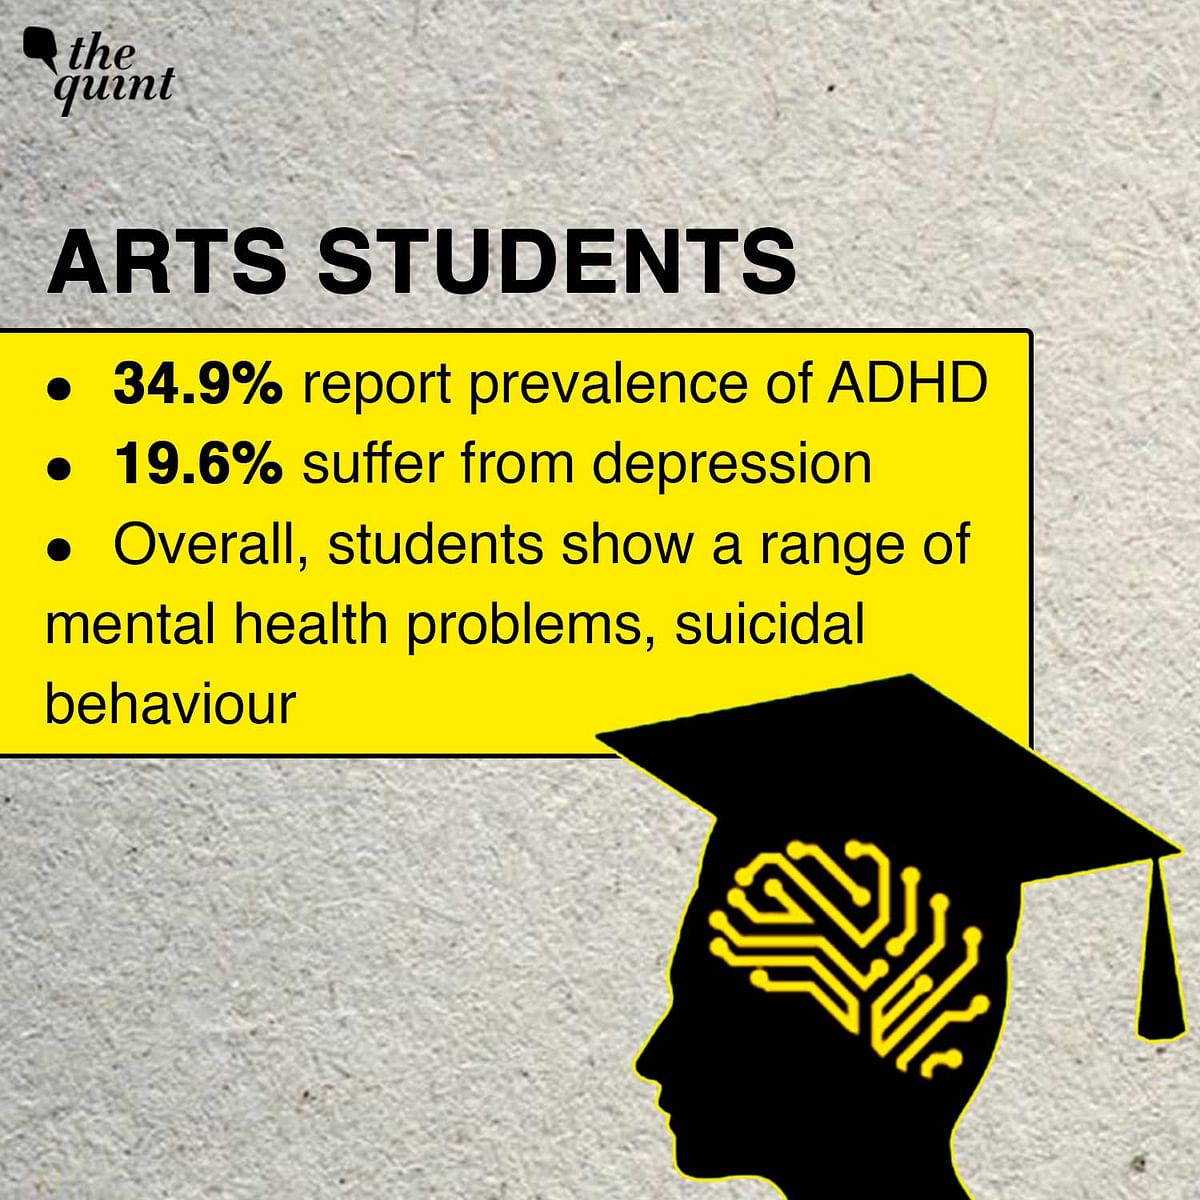 An Ireland study revealed that students pursuing certain disciplines are at heightened risk of mental health issues.